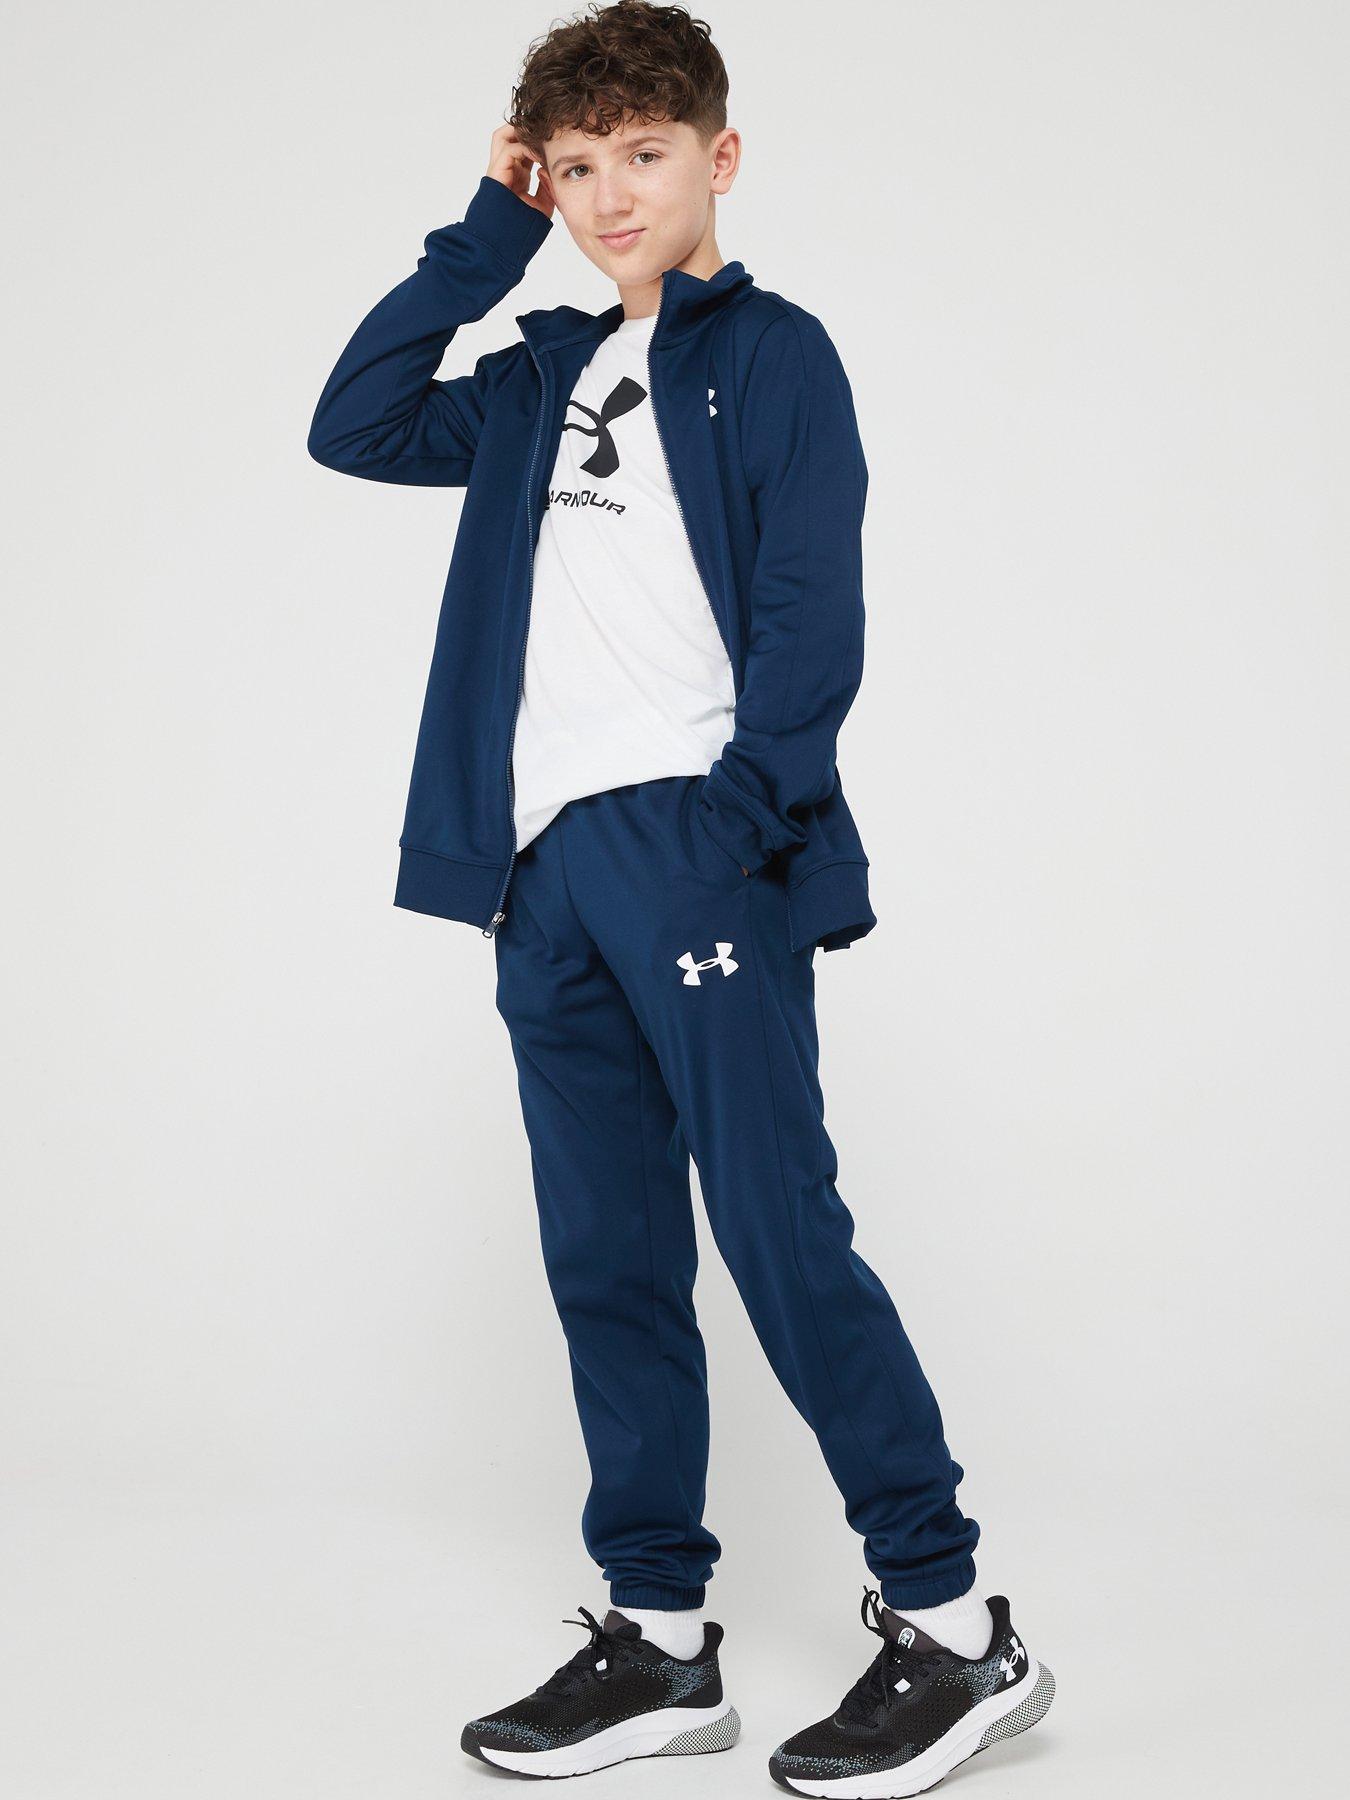 Boys, UNDER ARMOUR Childrens Knit Tracksuit - Navy/White, Navy/White, Size S=7-8 Years